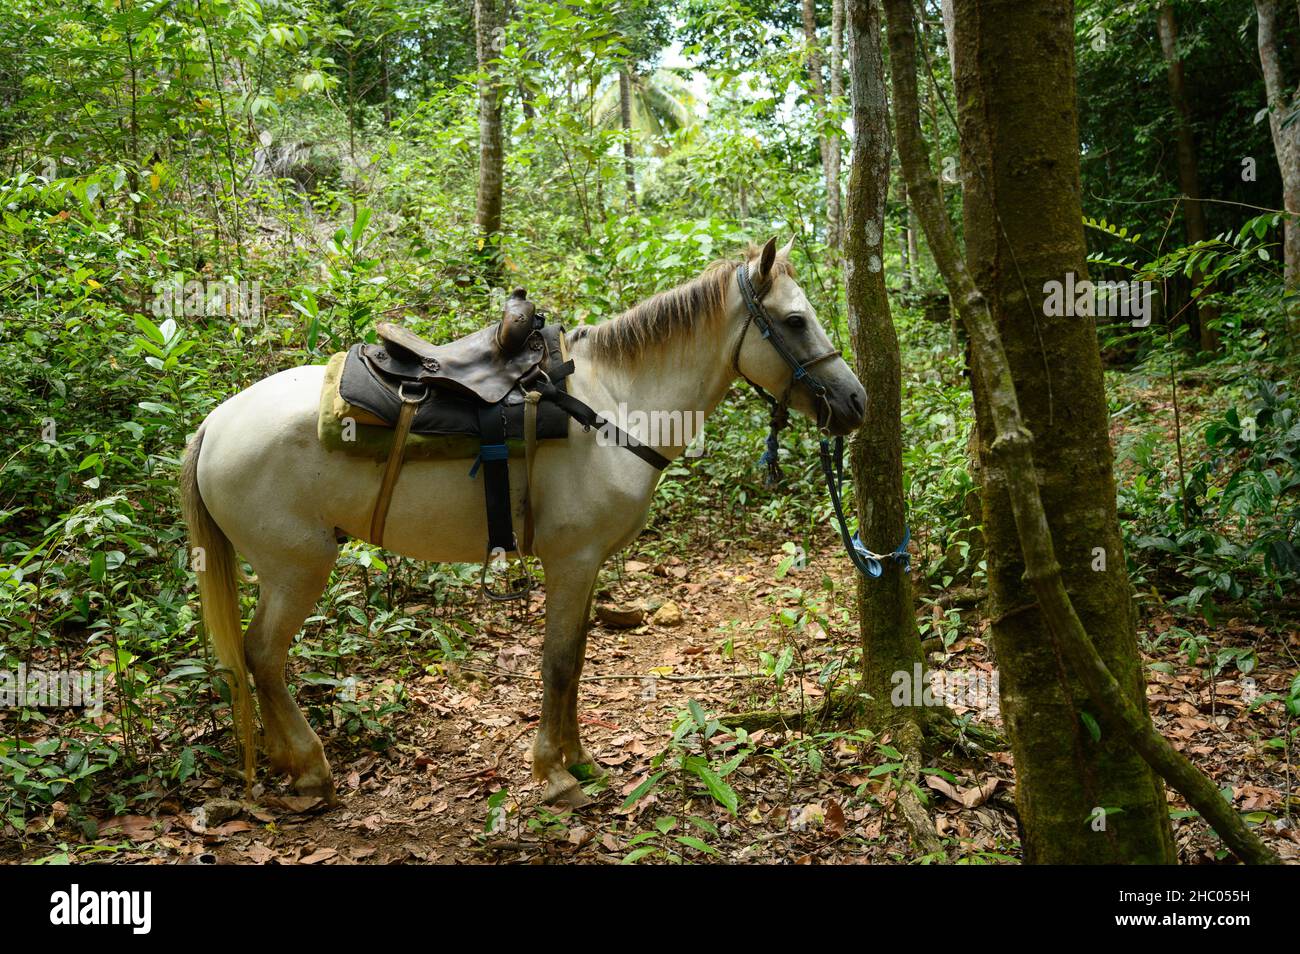 The photo shows a horse, close-up of its head and part of the body. The stallion in the photo is white. The picture shows a horse resting in the jungl Stock Photo